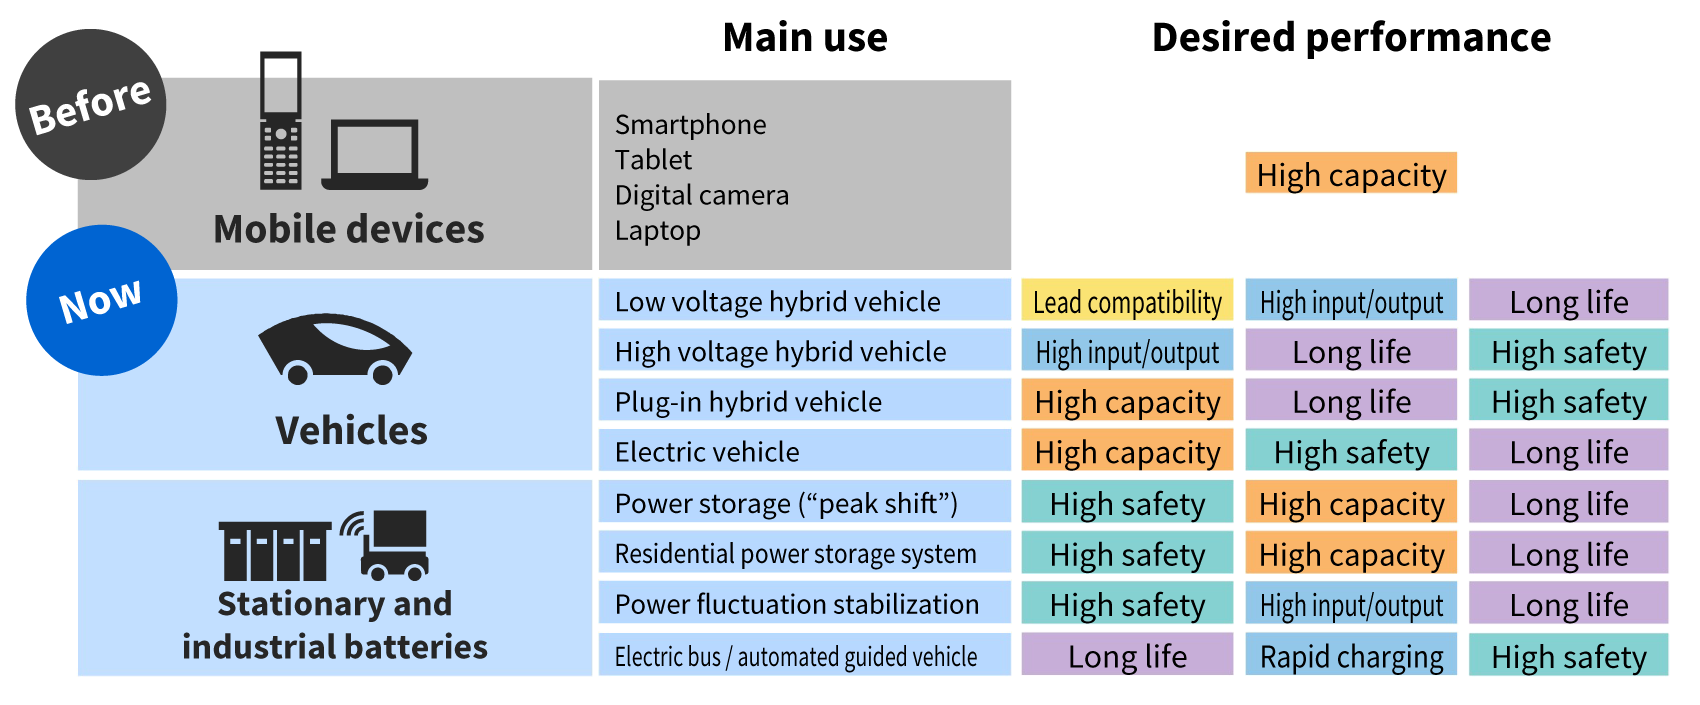 Different performances are required for different uses of lithium-ion batteries